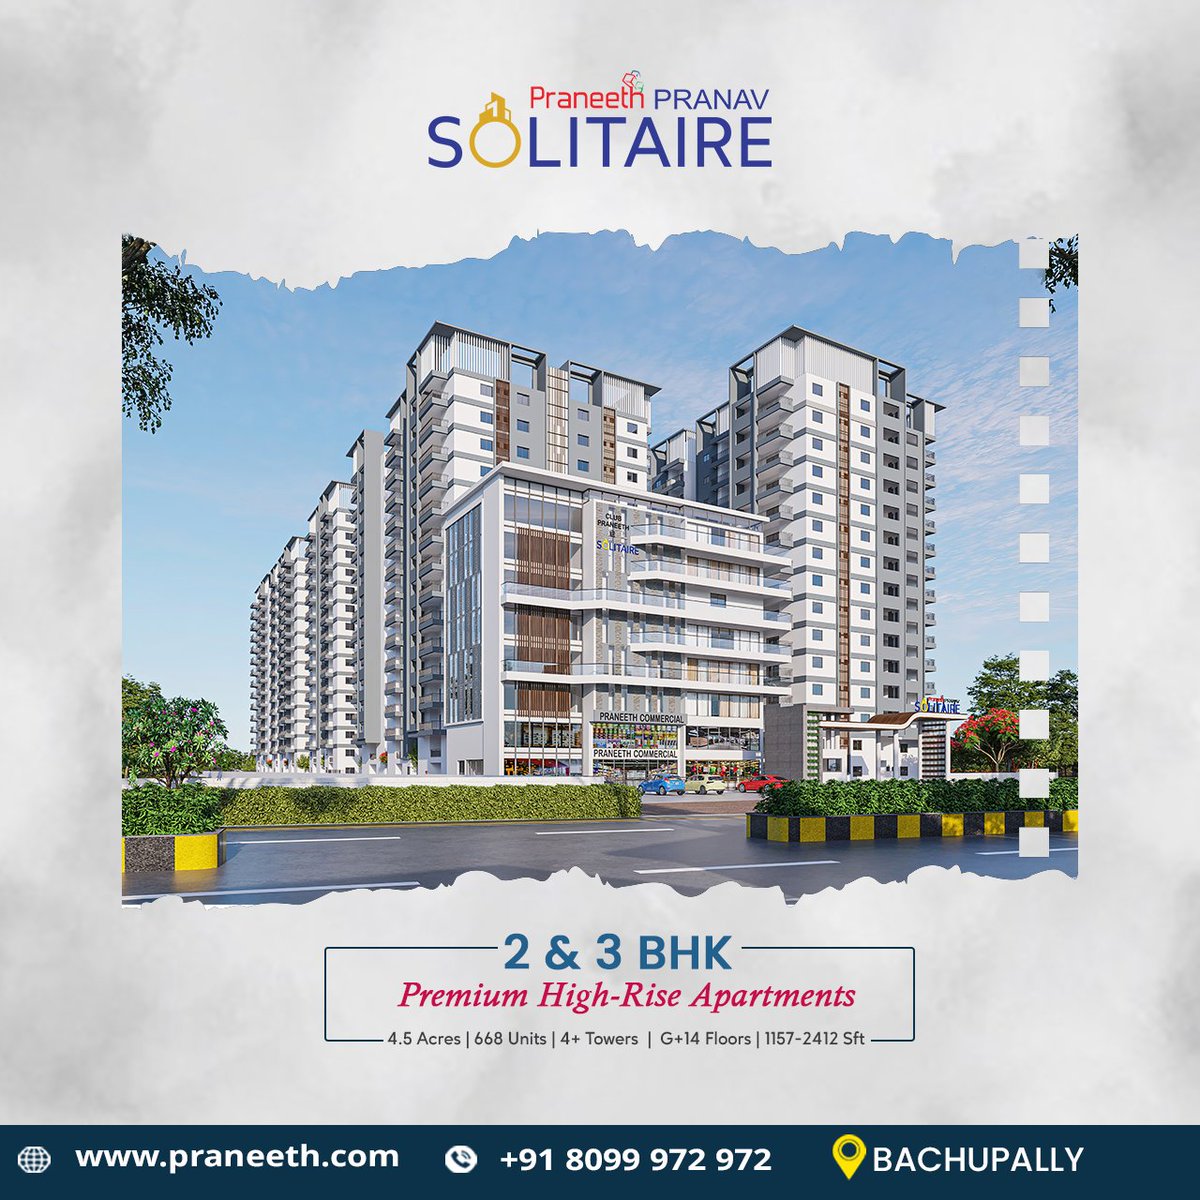 Experience the absolute pinnacle of family living at Praneeth Pranav Solitaire.
🌐 : praneeth.com/solitaire
☎️ : +91 8099972972
#praneethgroup #luxuryapartments #Bachupally #bestlocation #highriseapartments #BestFlats #BachupallyFlats #hyderabadrealestateupdates #hyderabad